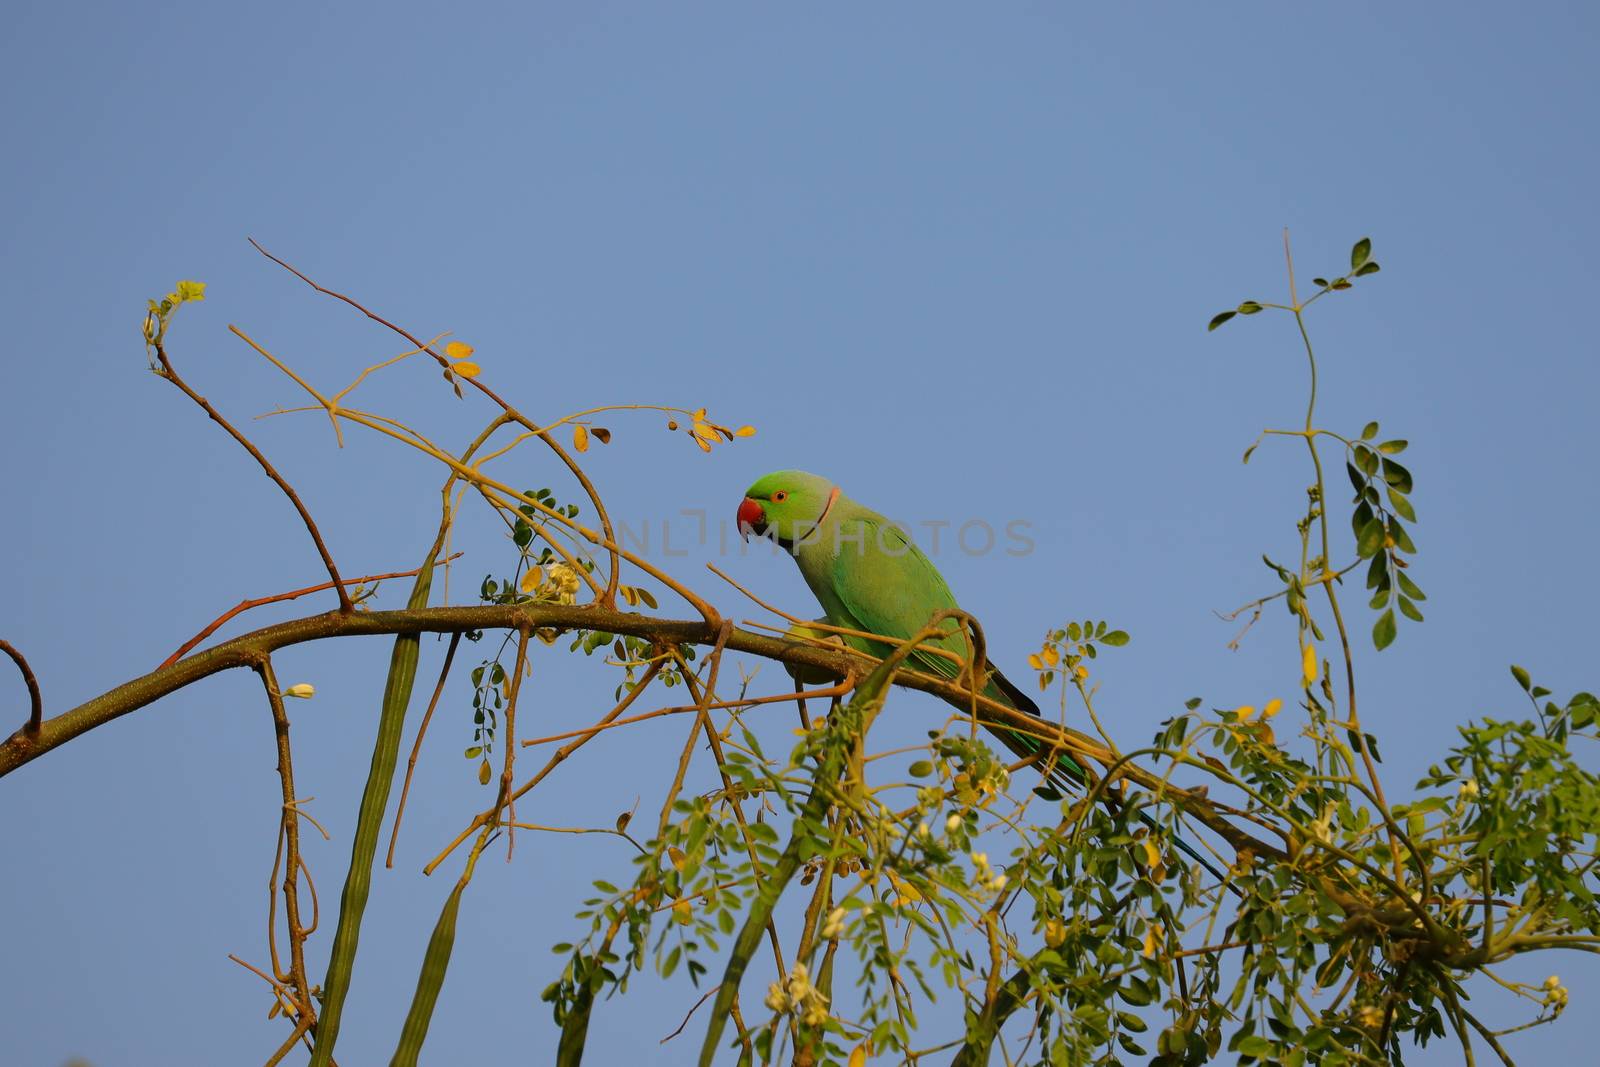 green parrot image , HD background, free bird background